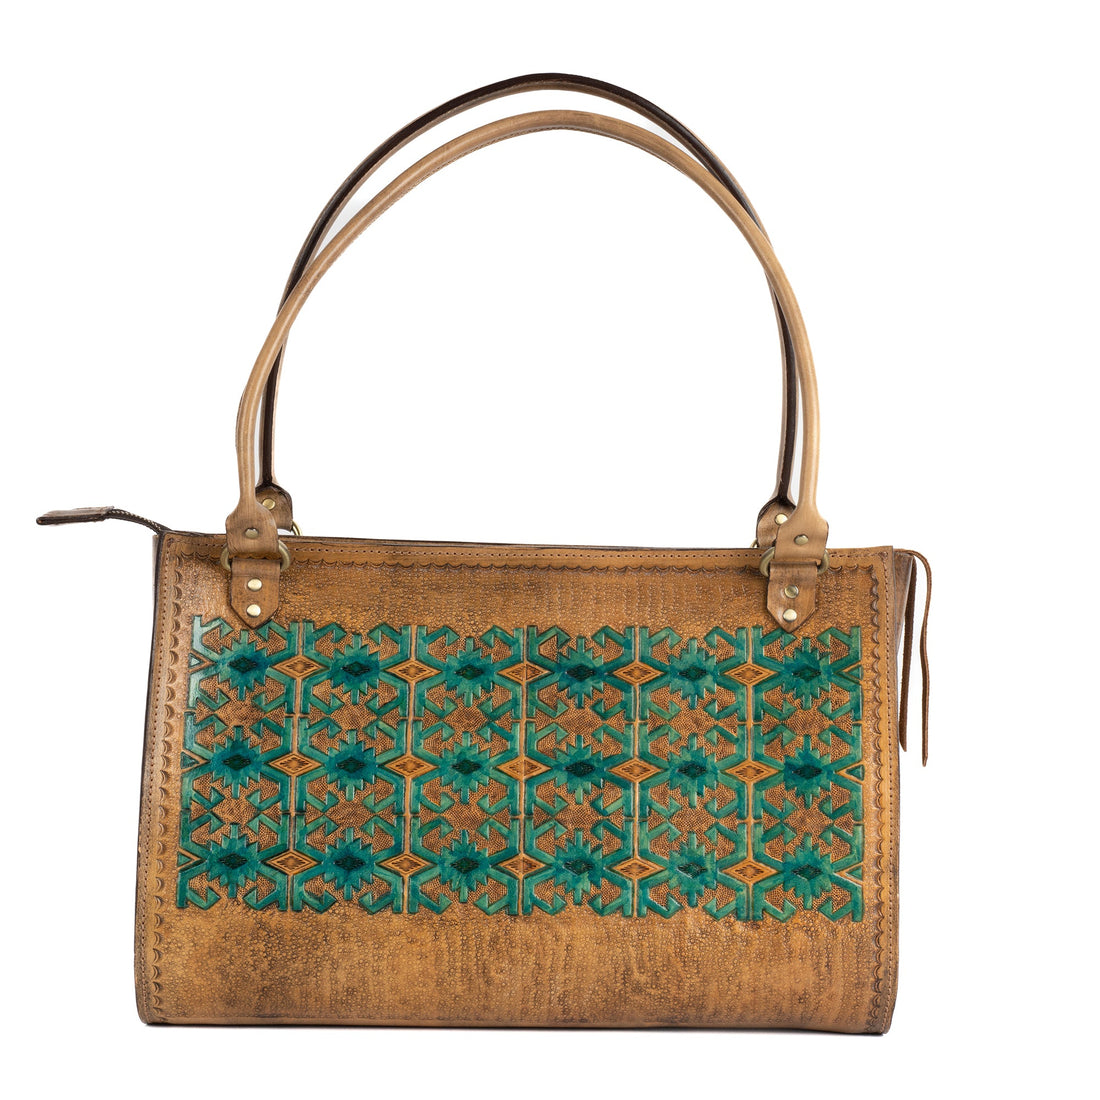 Hatti Tan Leather Carved & Crafted Hand Bag - Handbags Zengoda Shop online from Artisan Brands